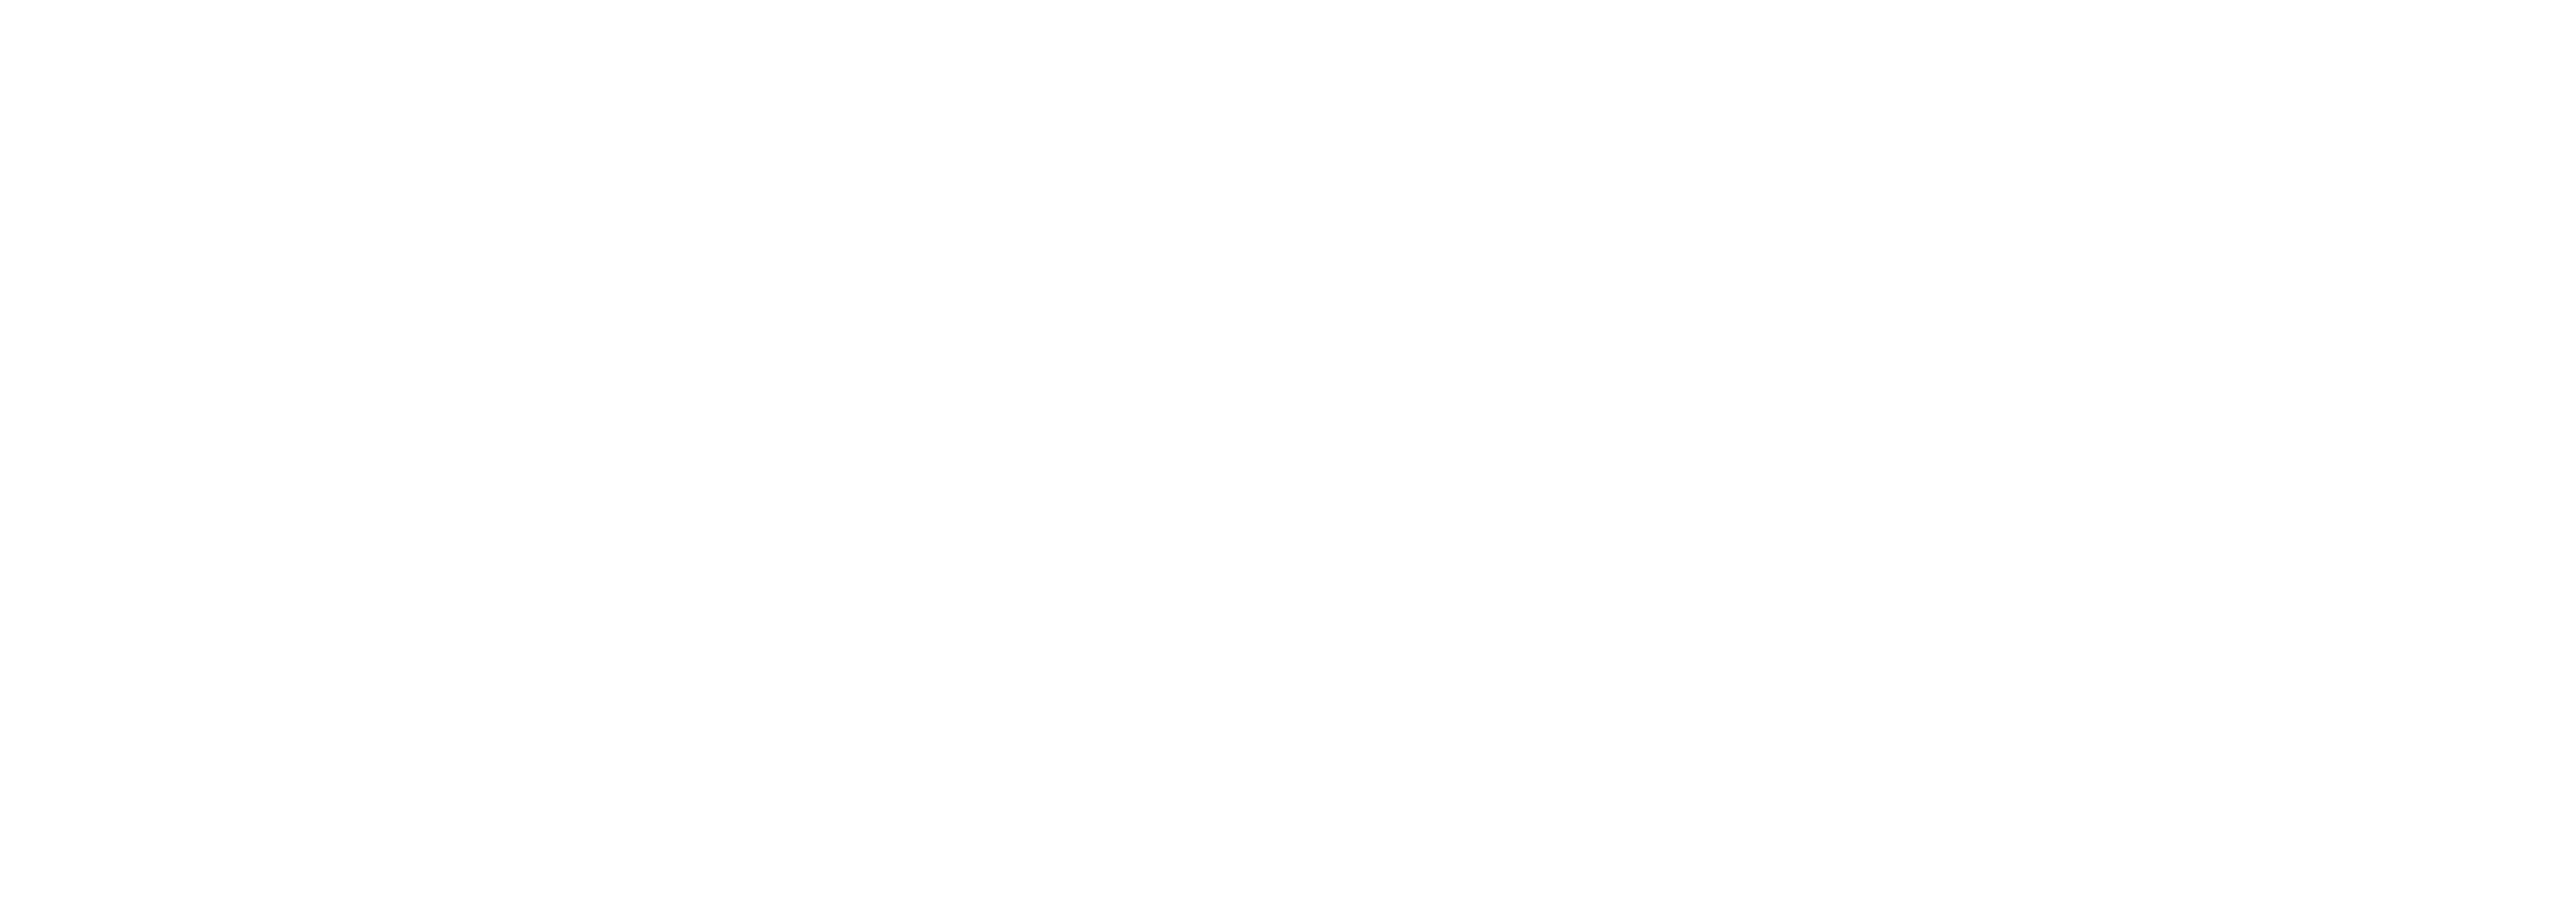 https://www.themuisca.com/